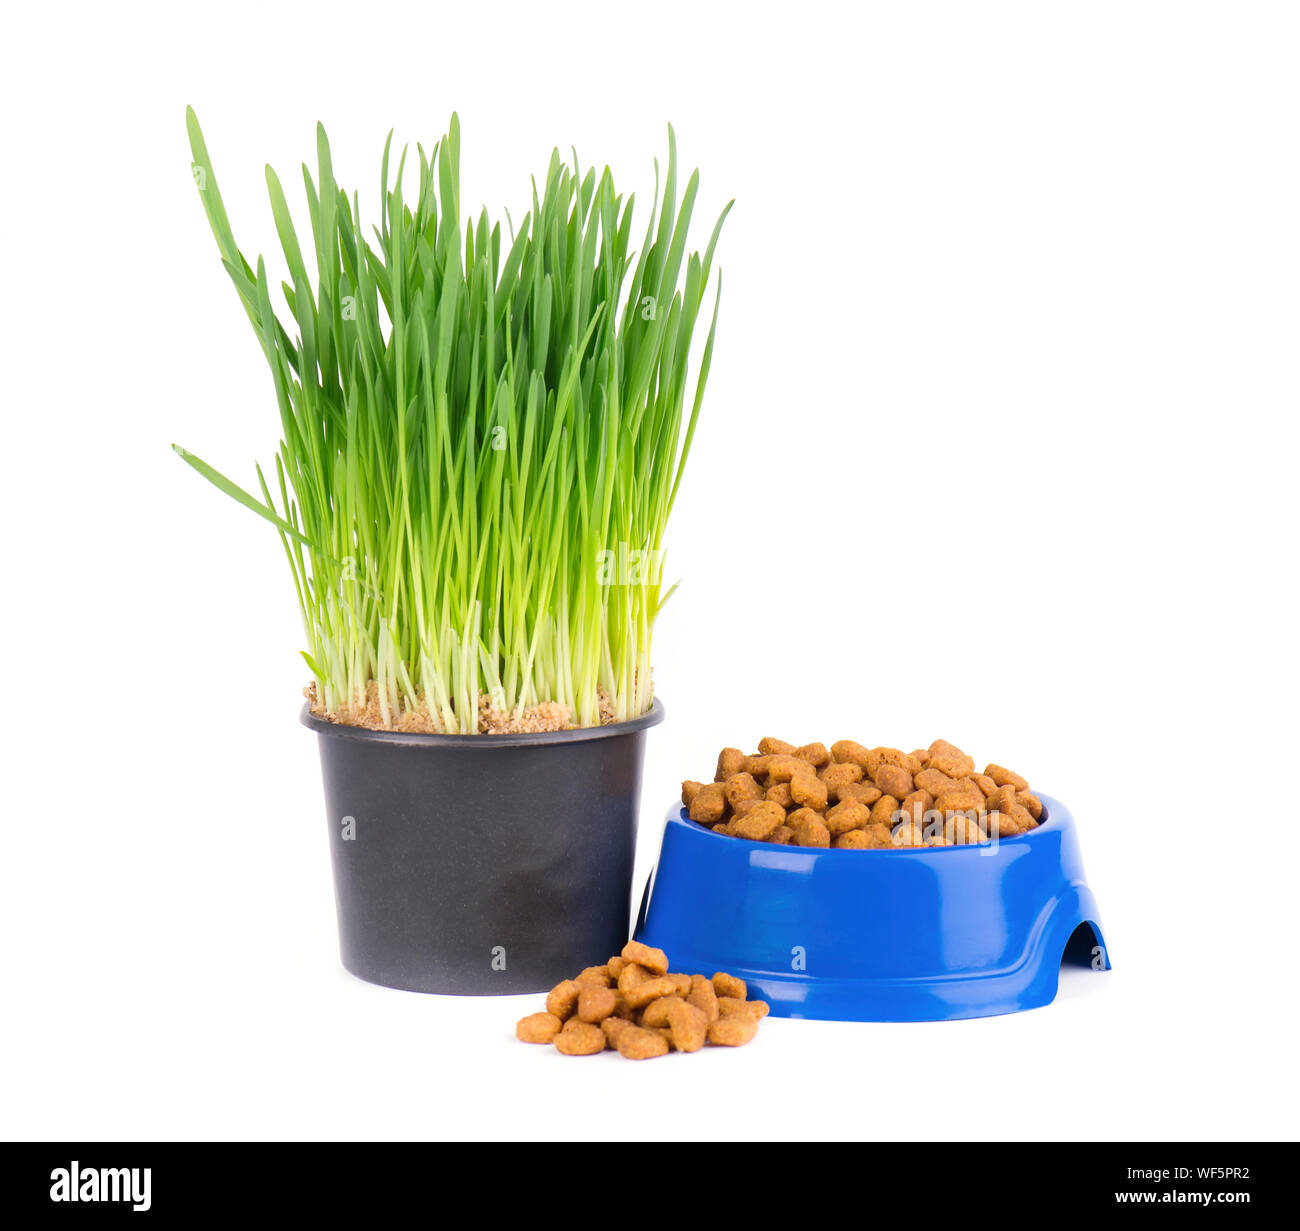 Dry cat food in a blue bowl. Fresh grass for cats. Isolated on white background Stock Photo